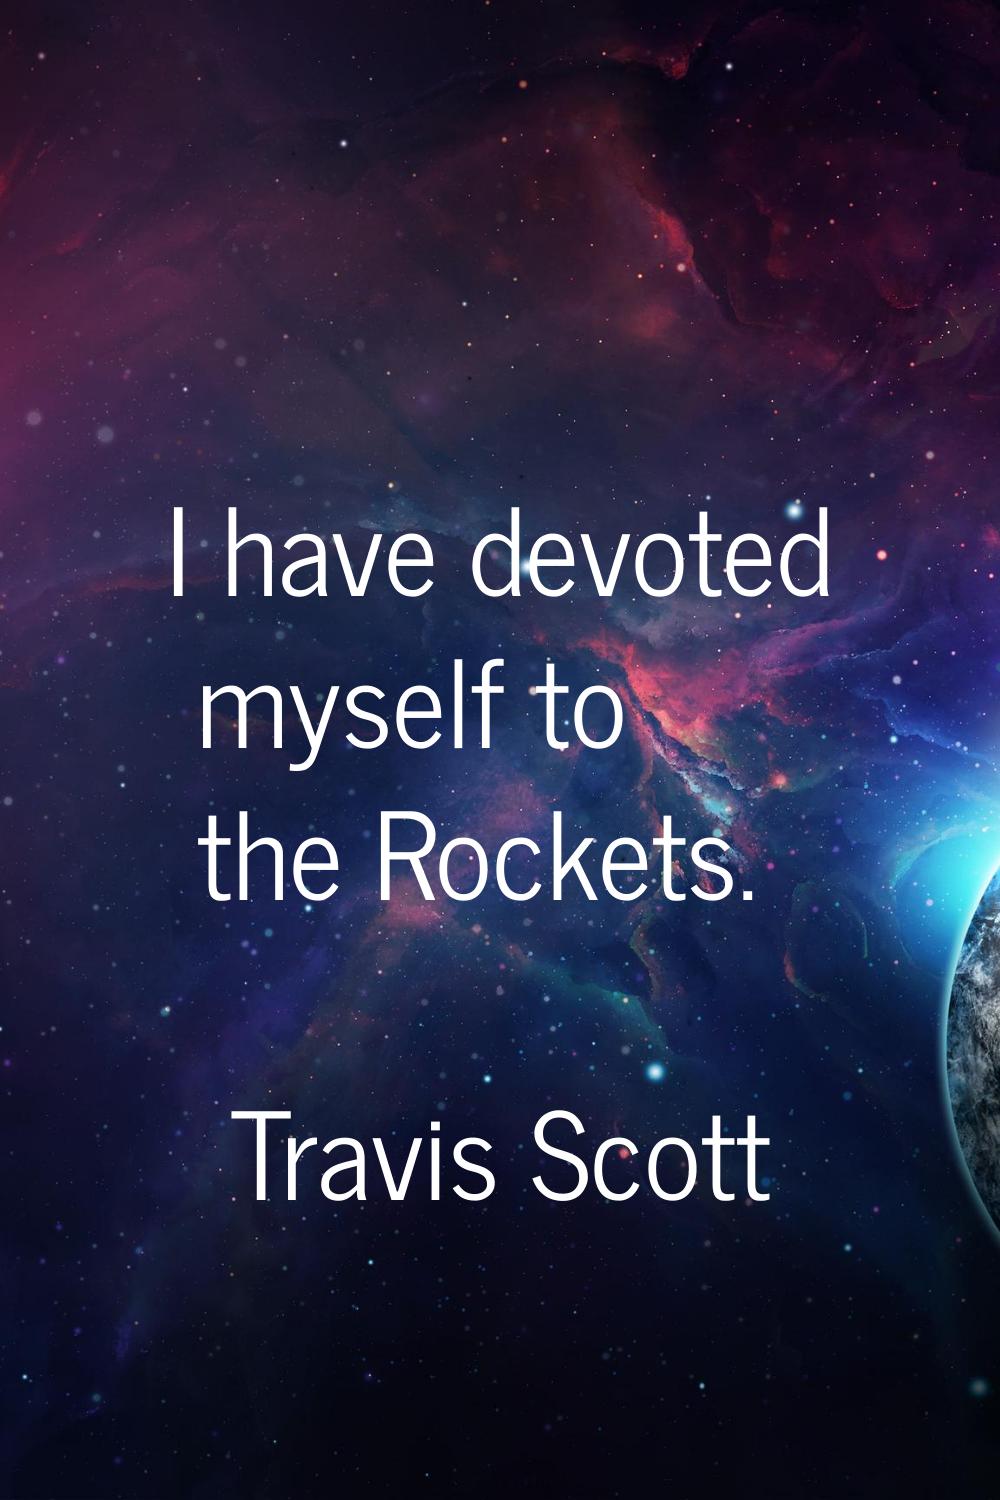 I have devoted myself to the Rockets.